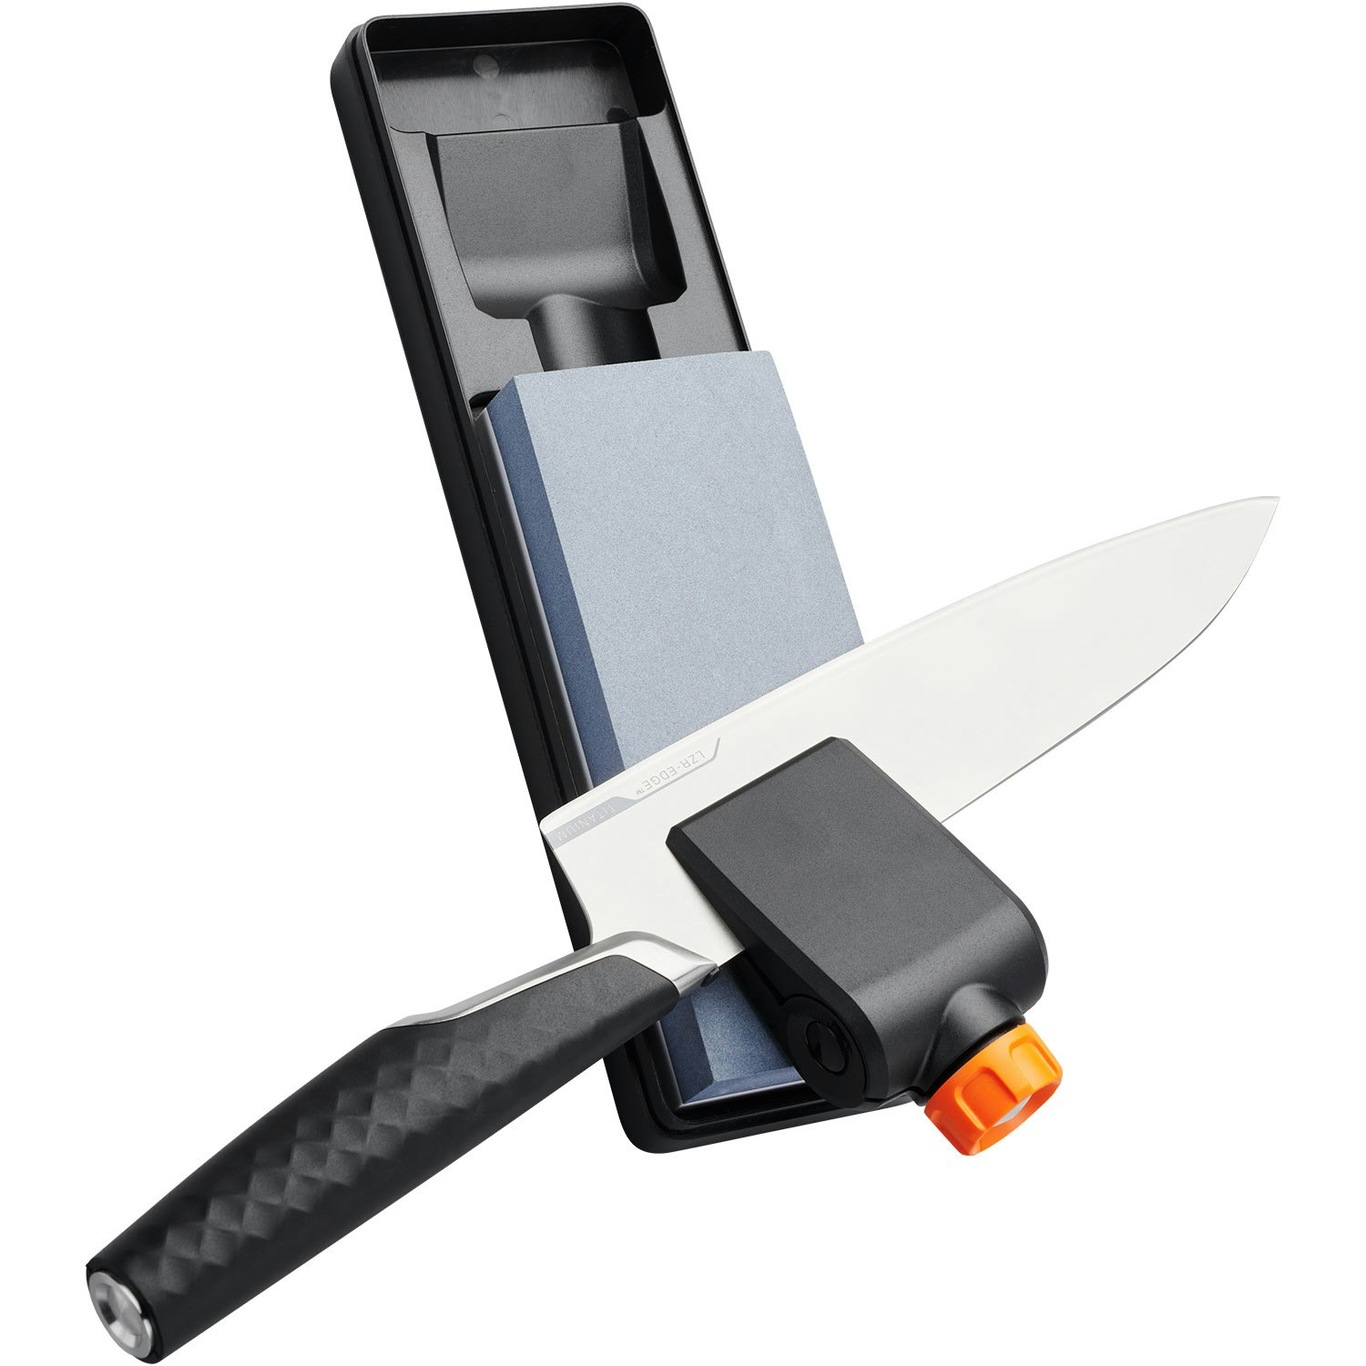 Knife Sharpener: Knife Sharpeners To Keep All Your Knives Sharp